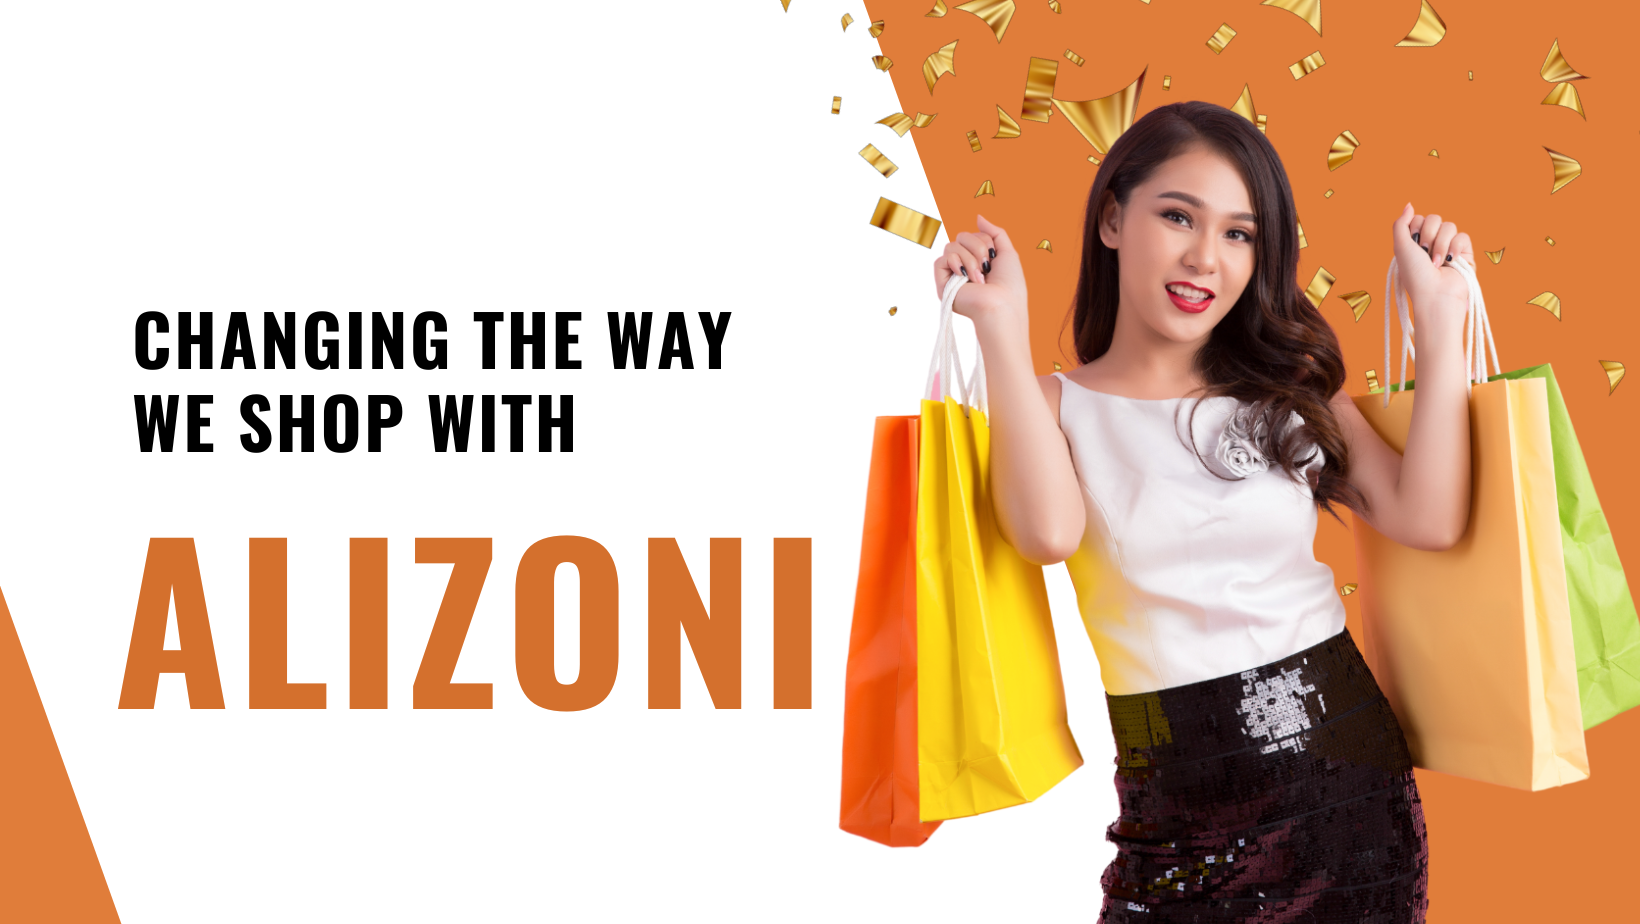 You are currently viewing Changing the Way We Shop with Alizoni